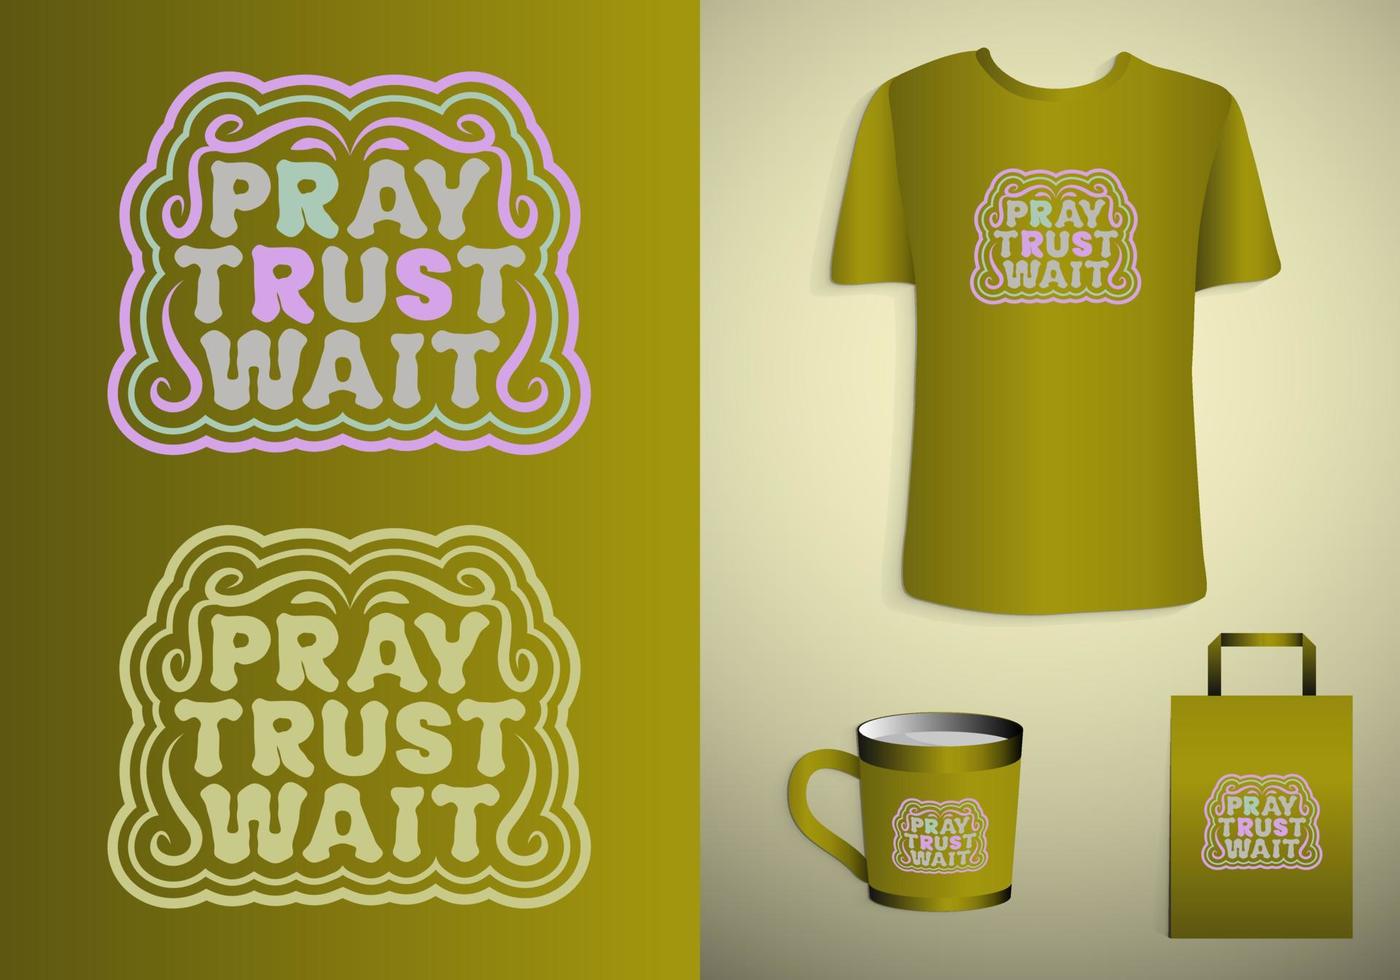 Trust. Pray. Wait. Quote Typography for prints on t-shirts and bags, stationary or poster. vector